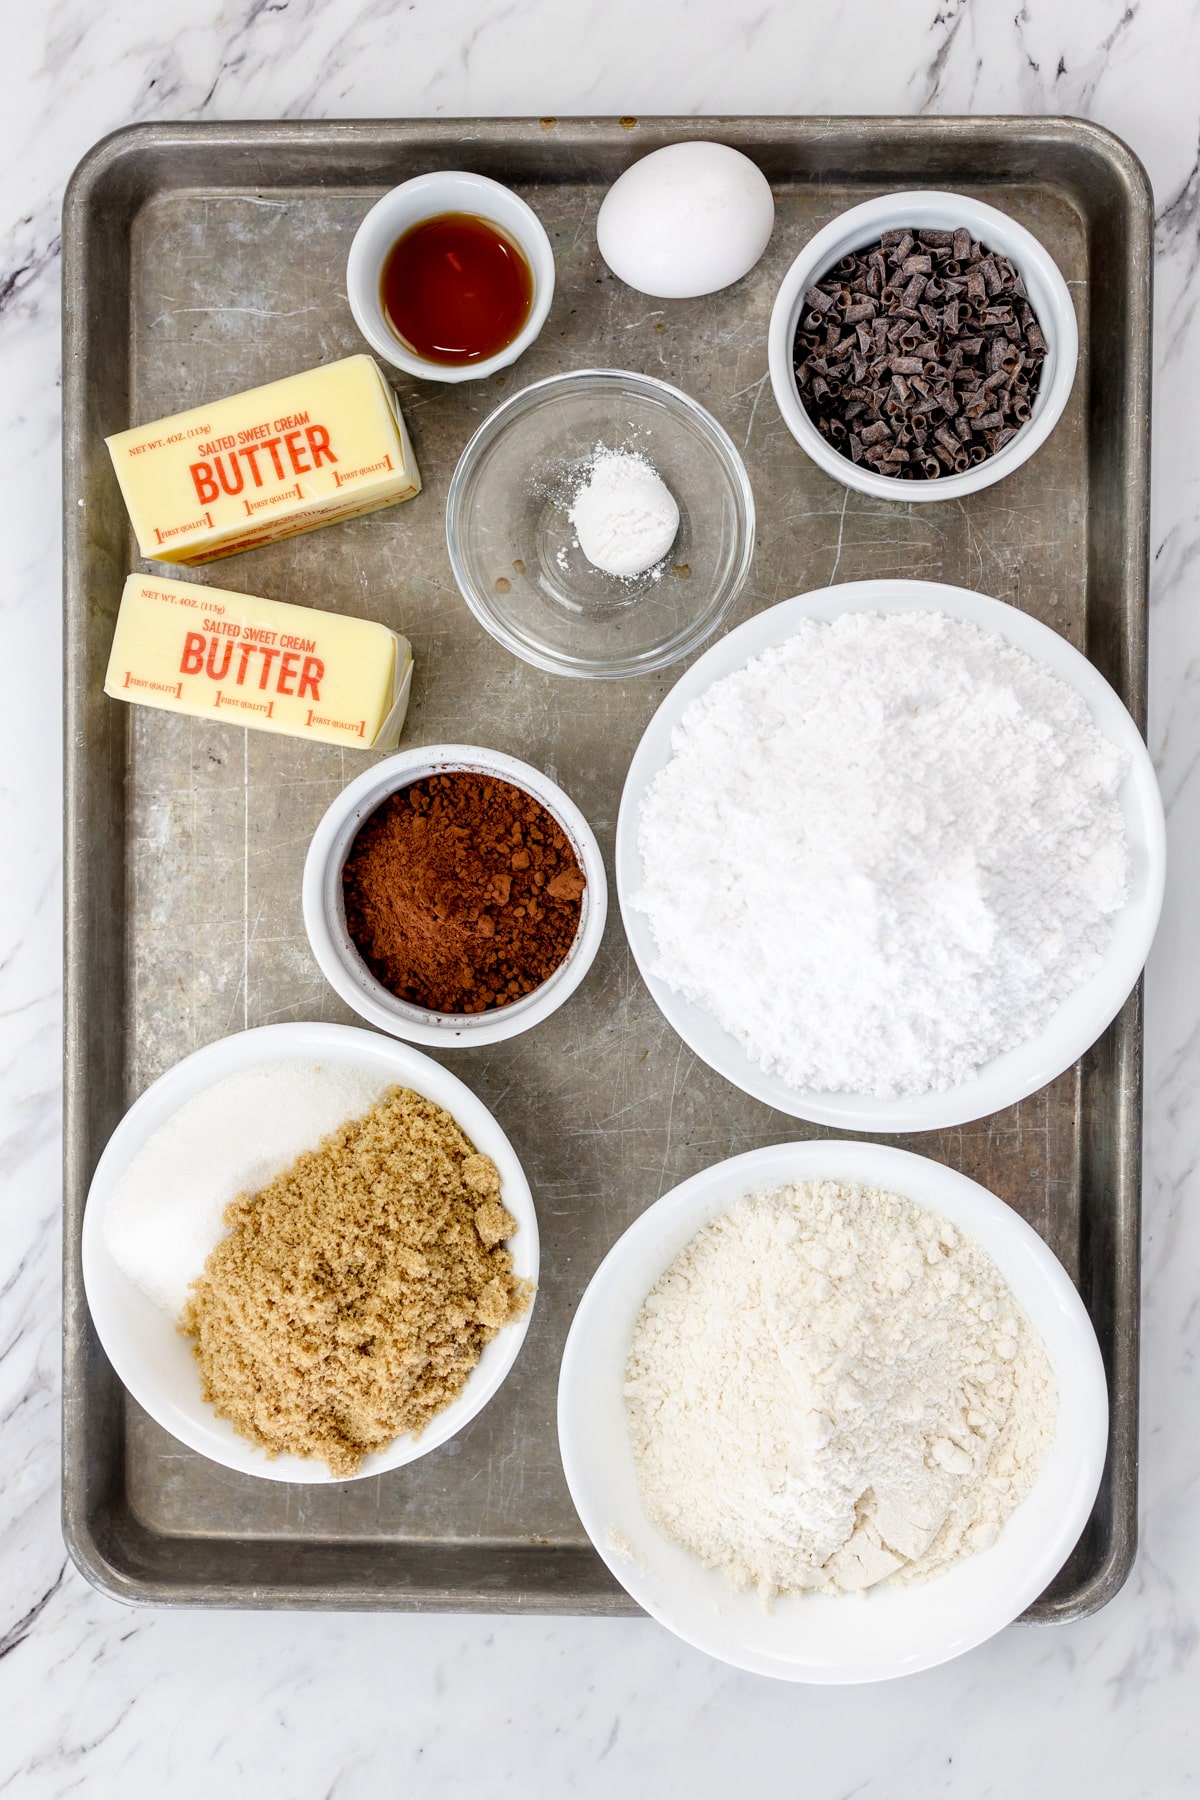 Top view of ingredients needed to make Chocolate Cake Cookies in small bowls on a baking tray.